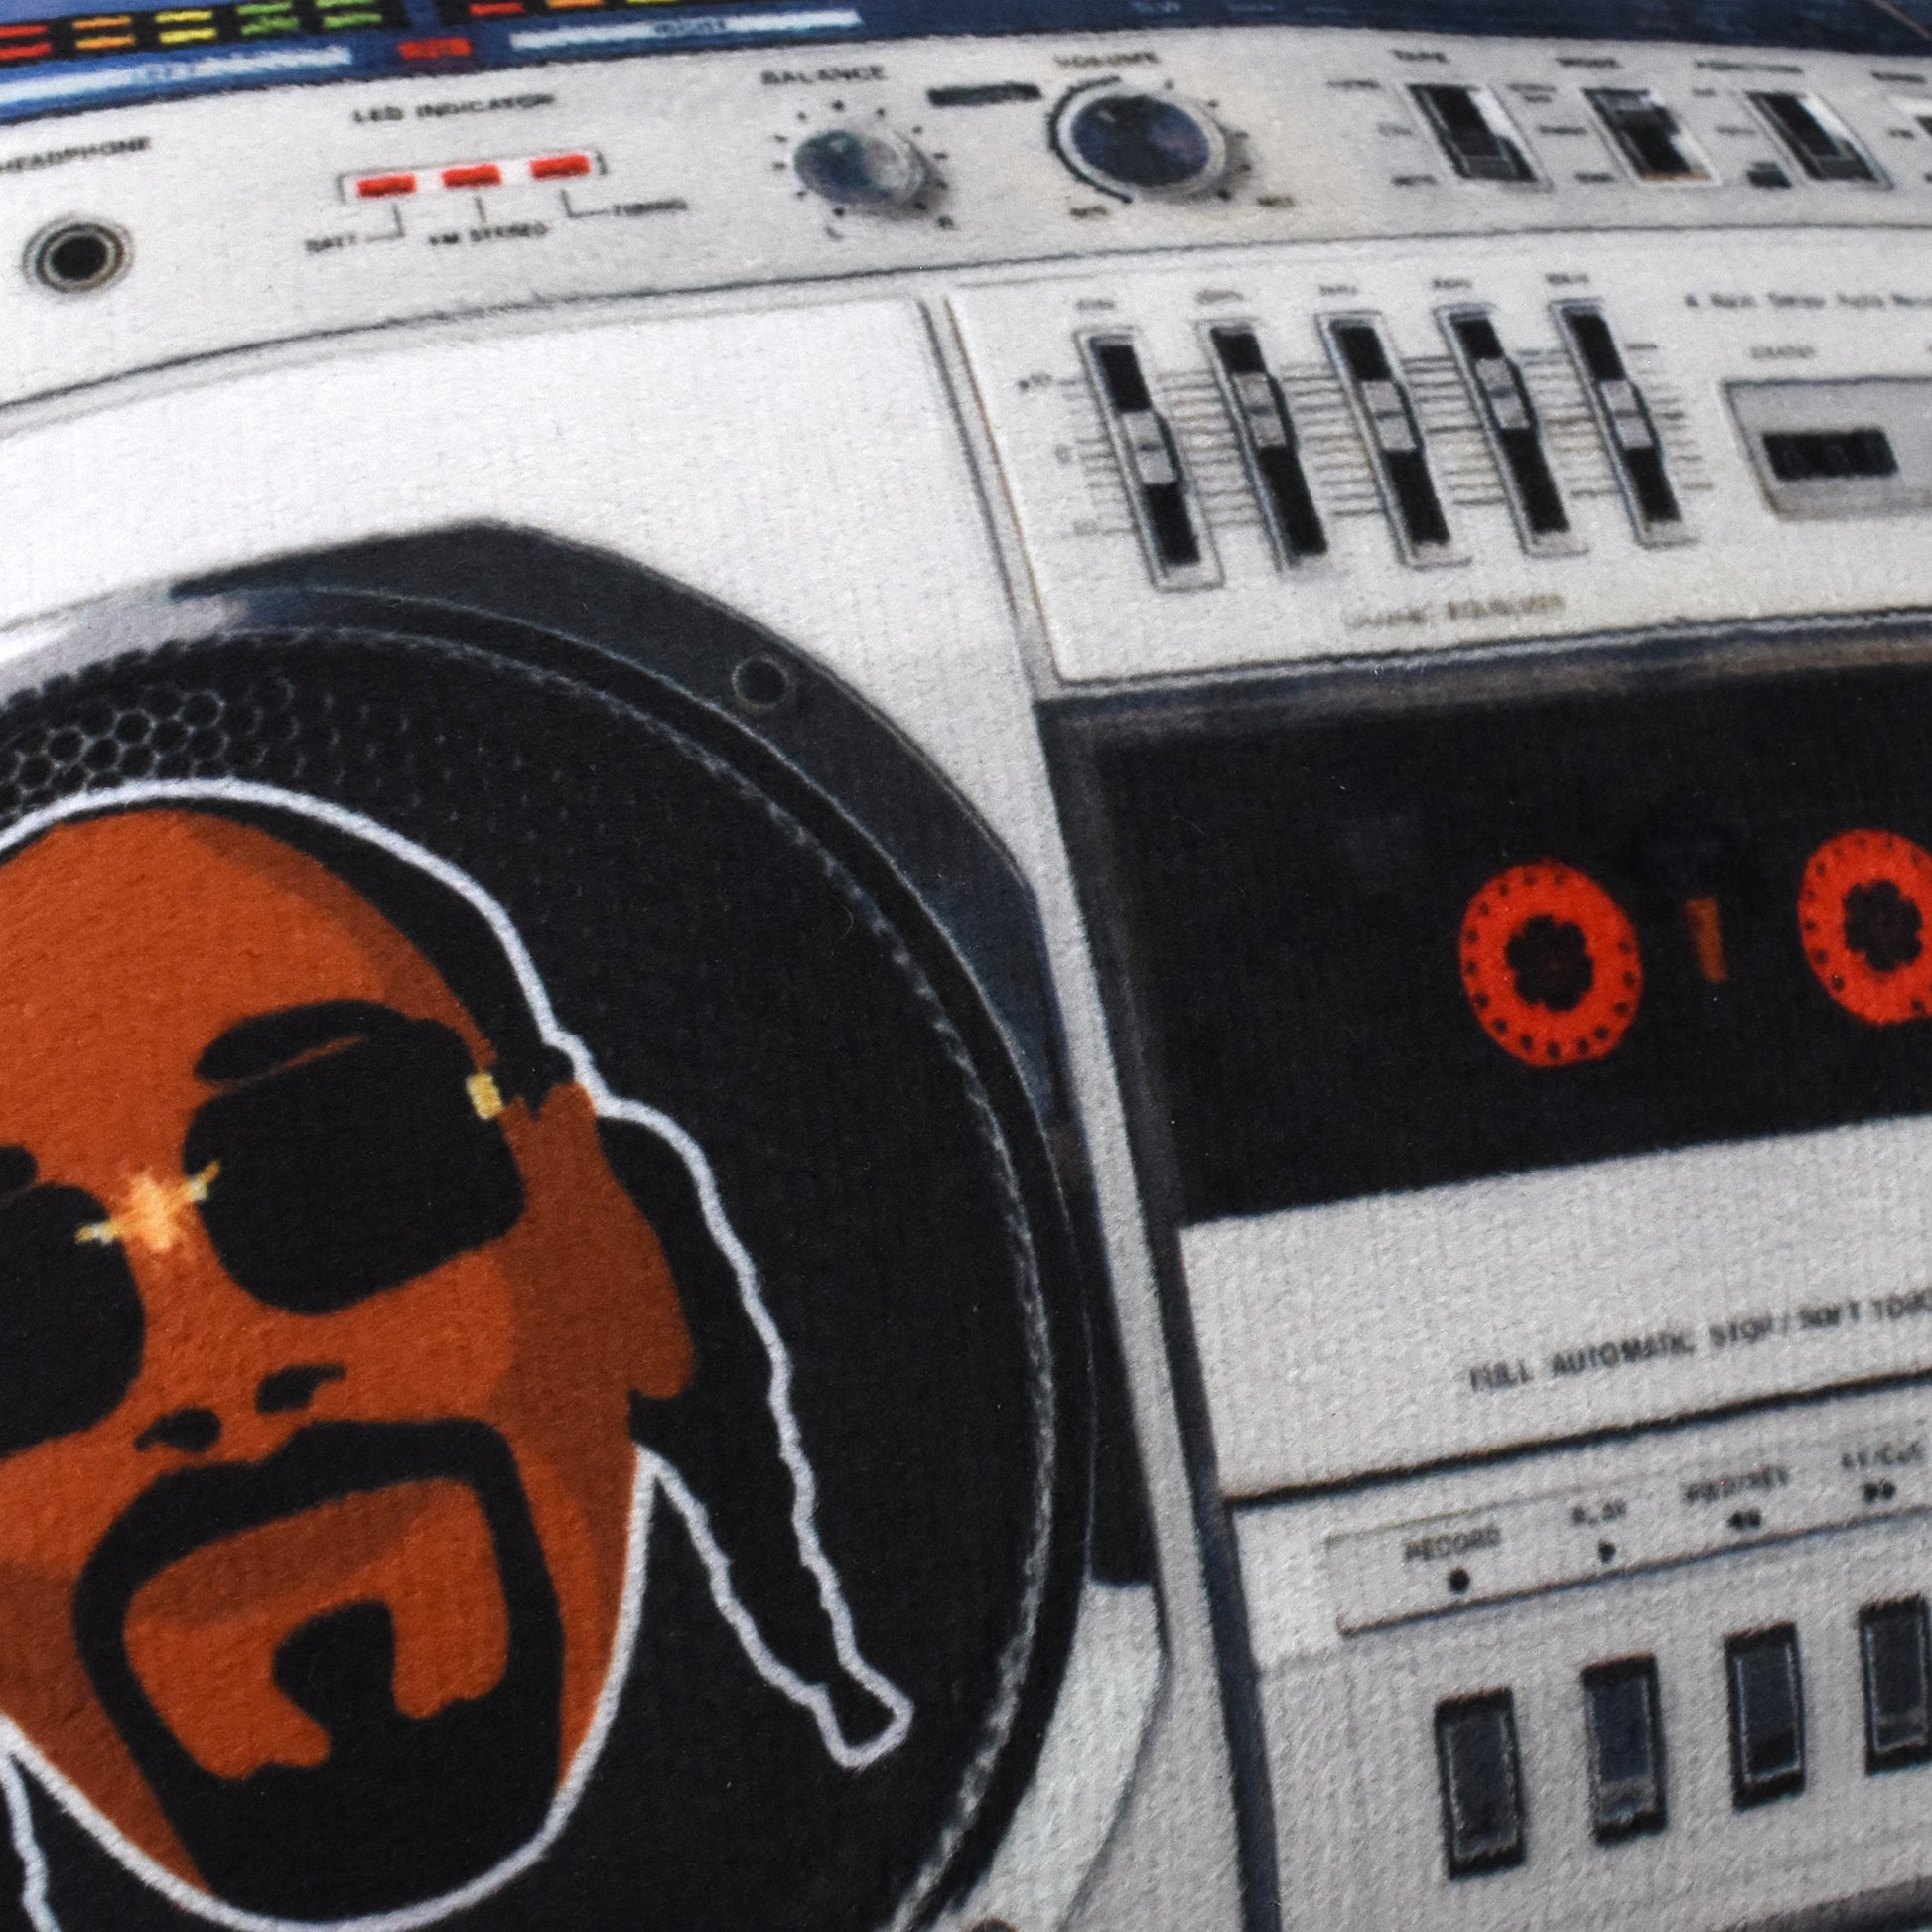 A close up detail image showing the plush fabric of the Deluxe Boom Box Pet Toy.